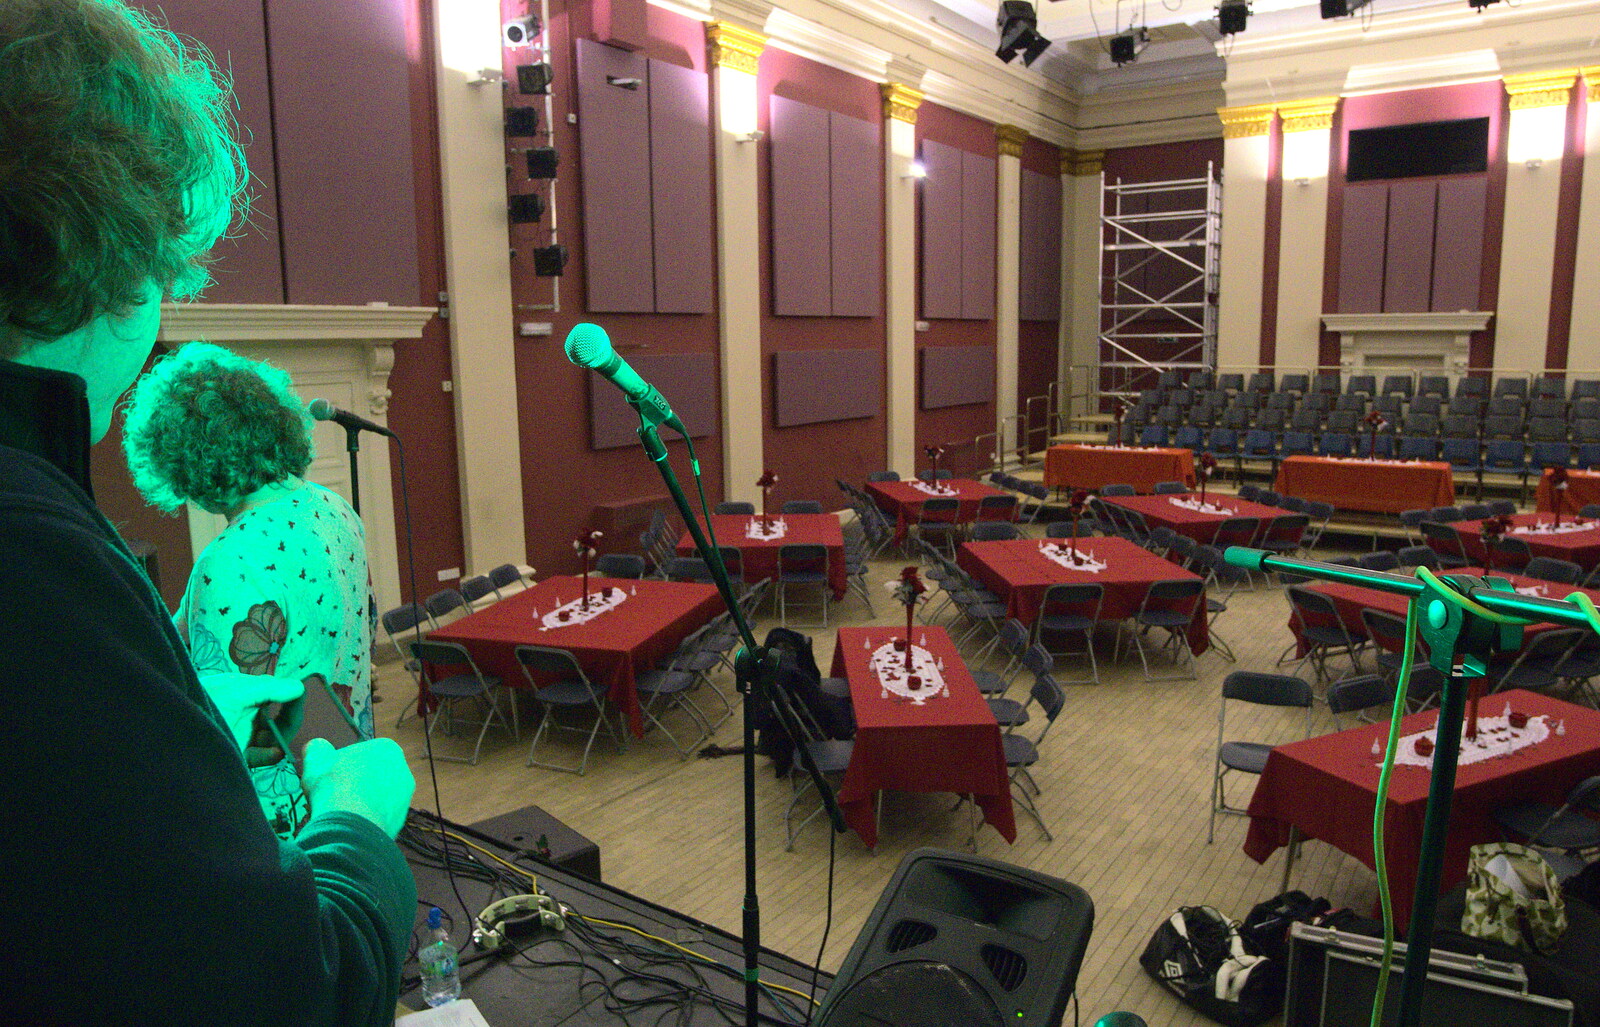 A view of the room from the stage from The BBs at The Cornhall, Diss, Norfolk - 31st January 2013